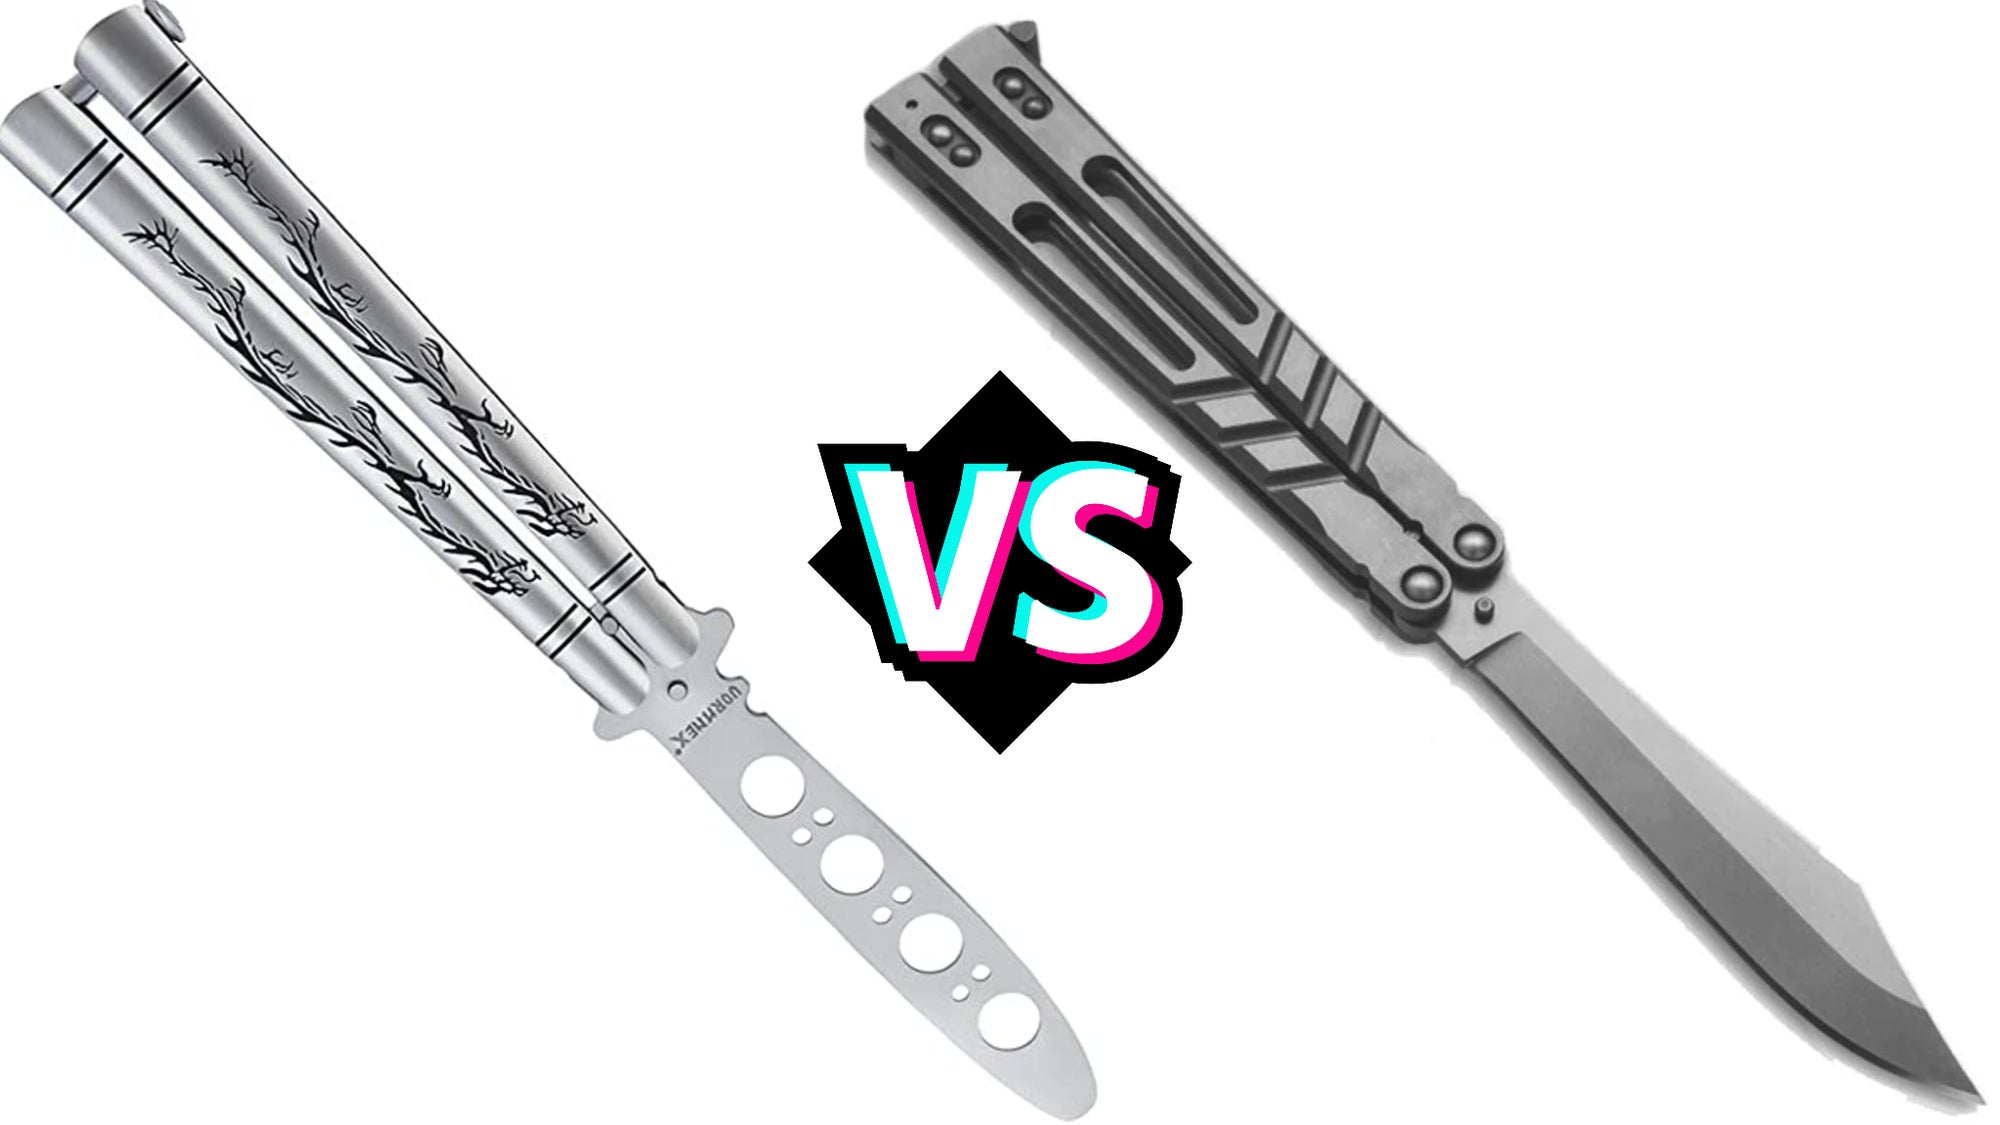 What to Expect in a Balisong at Different Price Points